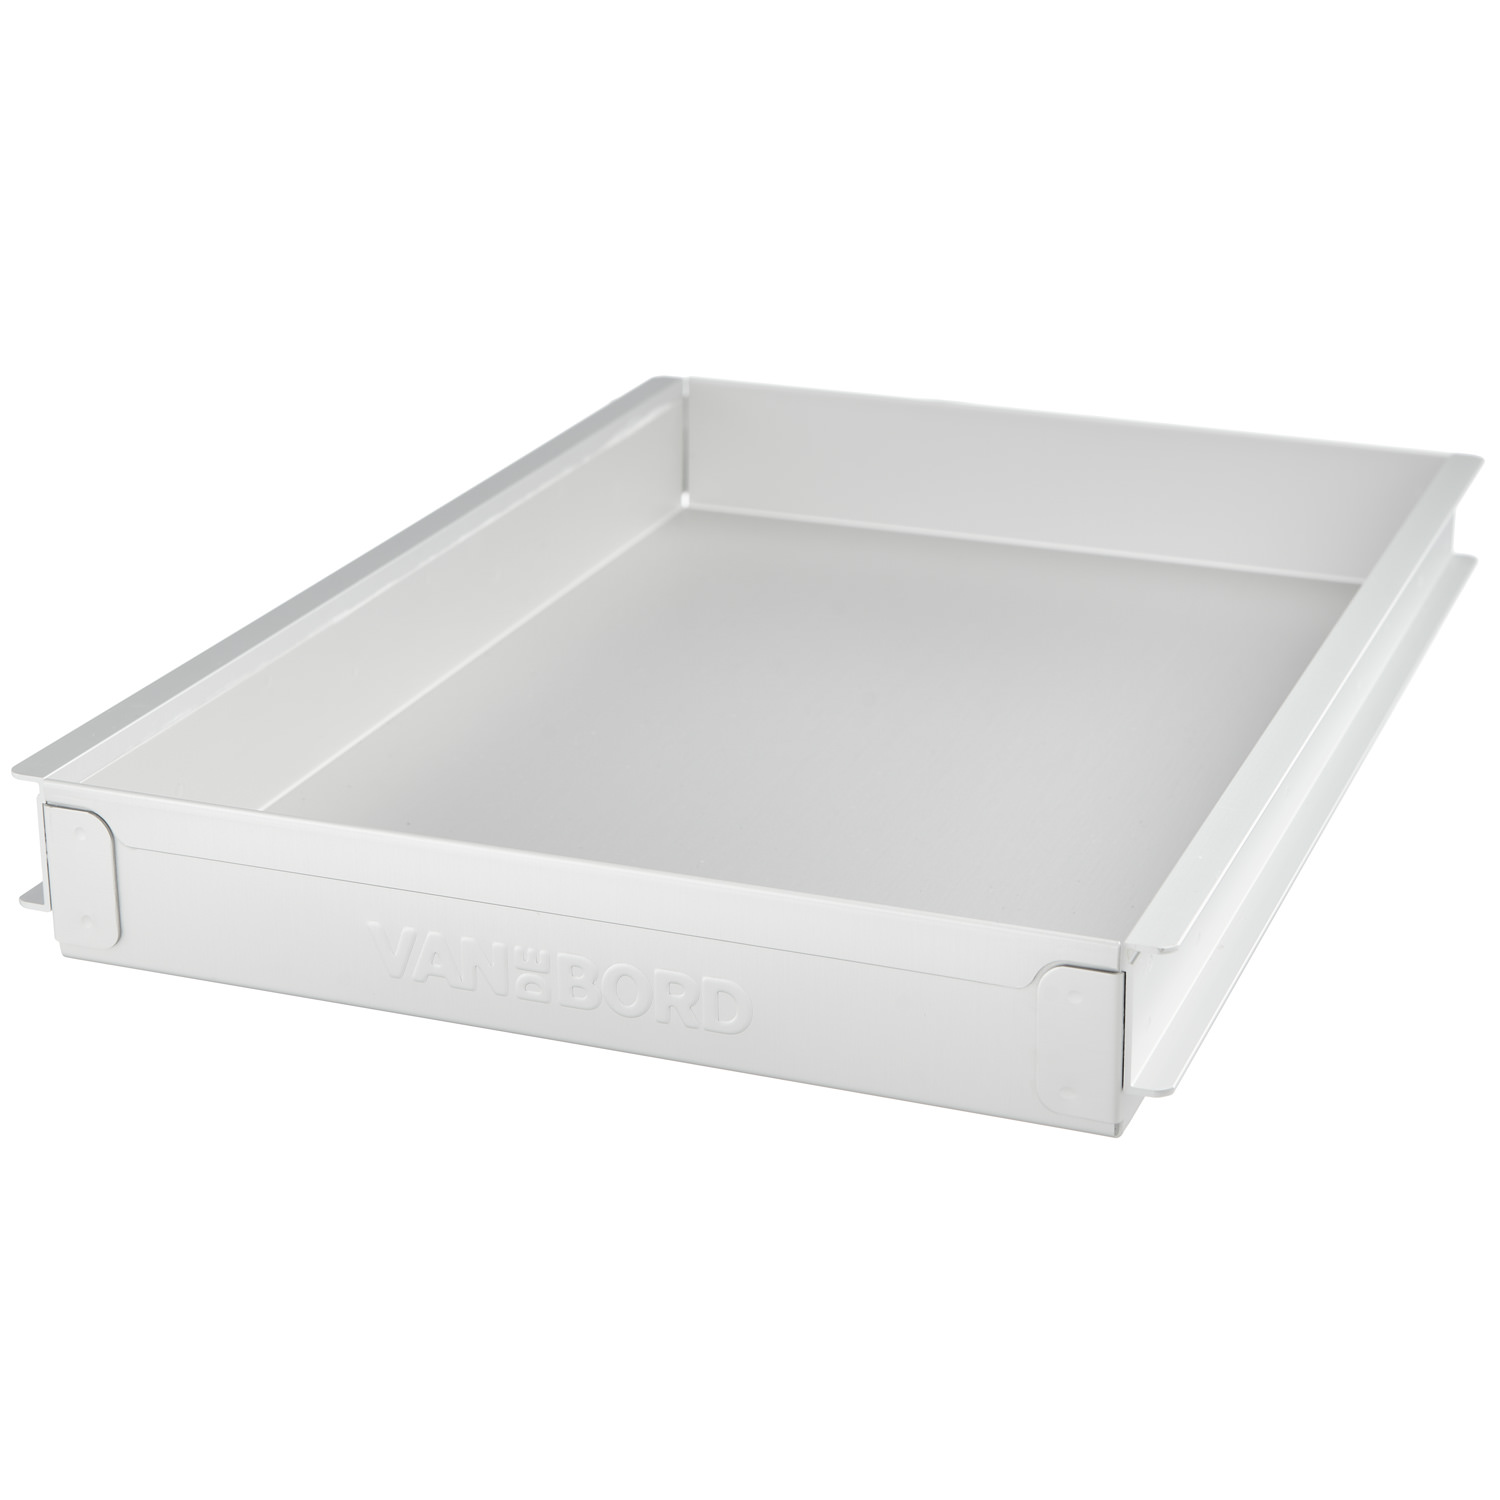 Aluminum Drawer S for Airline Trolleys & Aviation Boxes KSSU